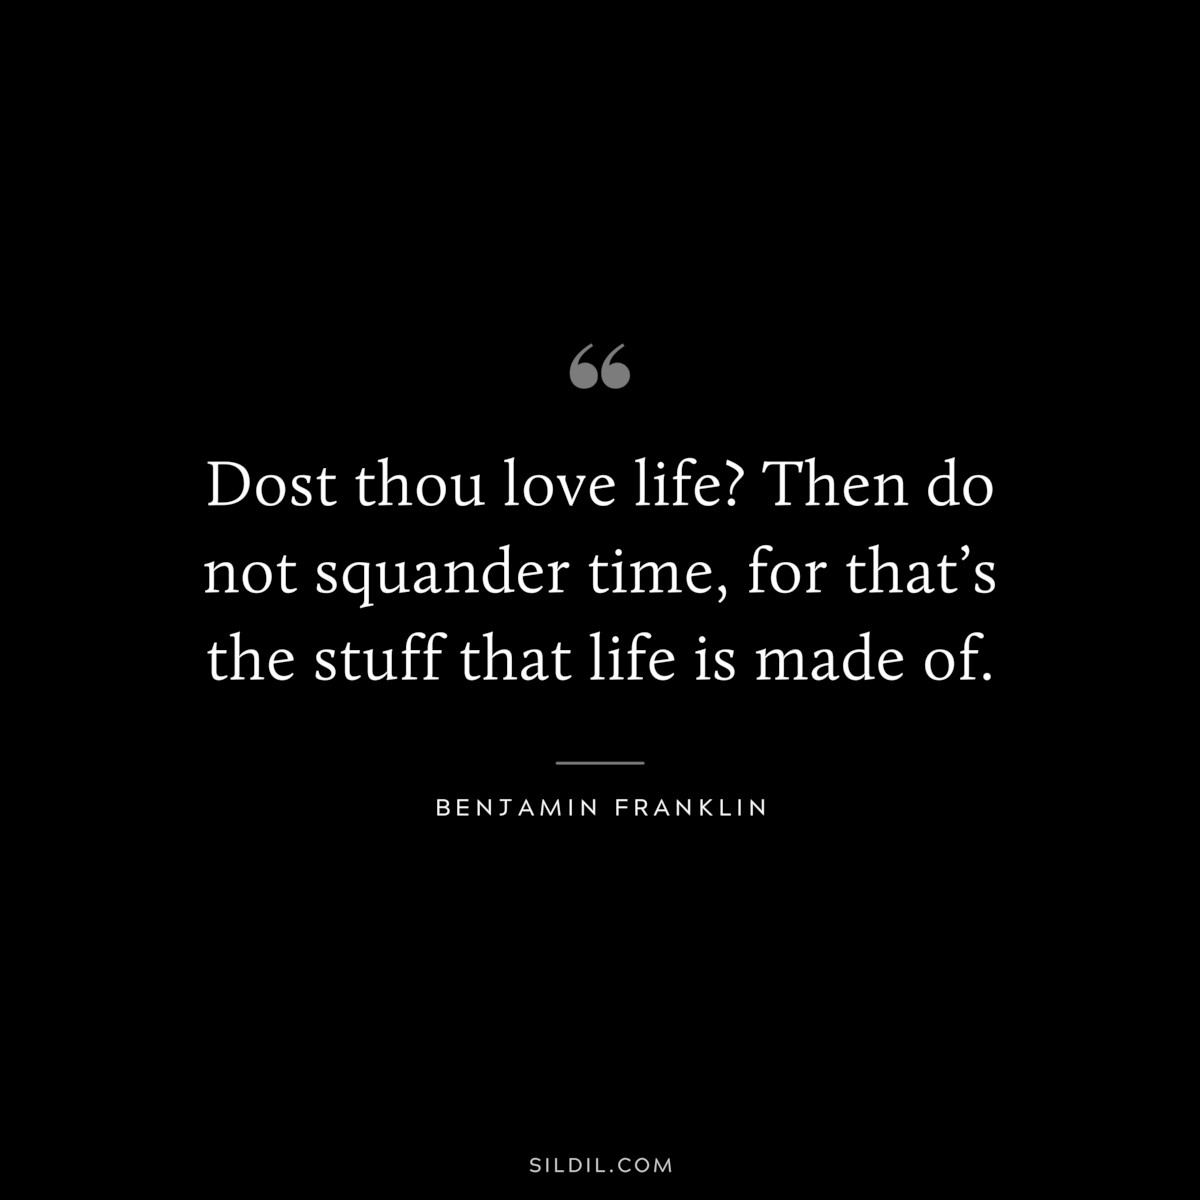 Dost thou love life? Then do not squander time, for that’s the stuff that life is made of. ― Benjamin Franklin